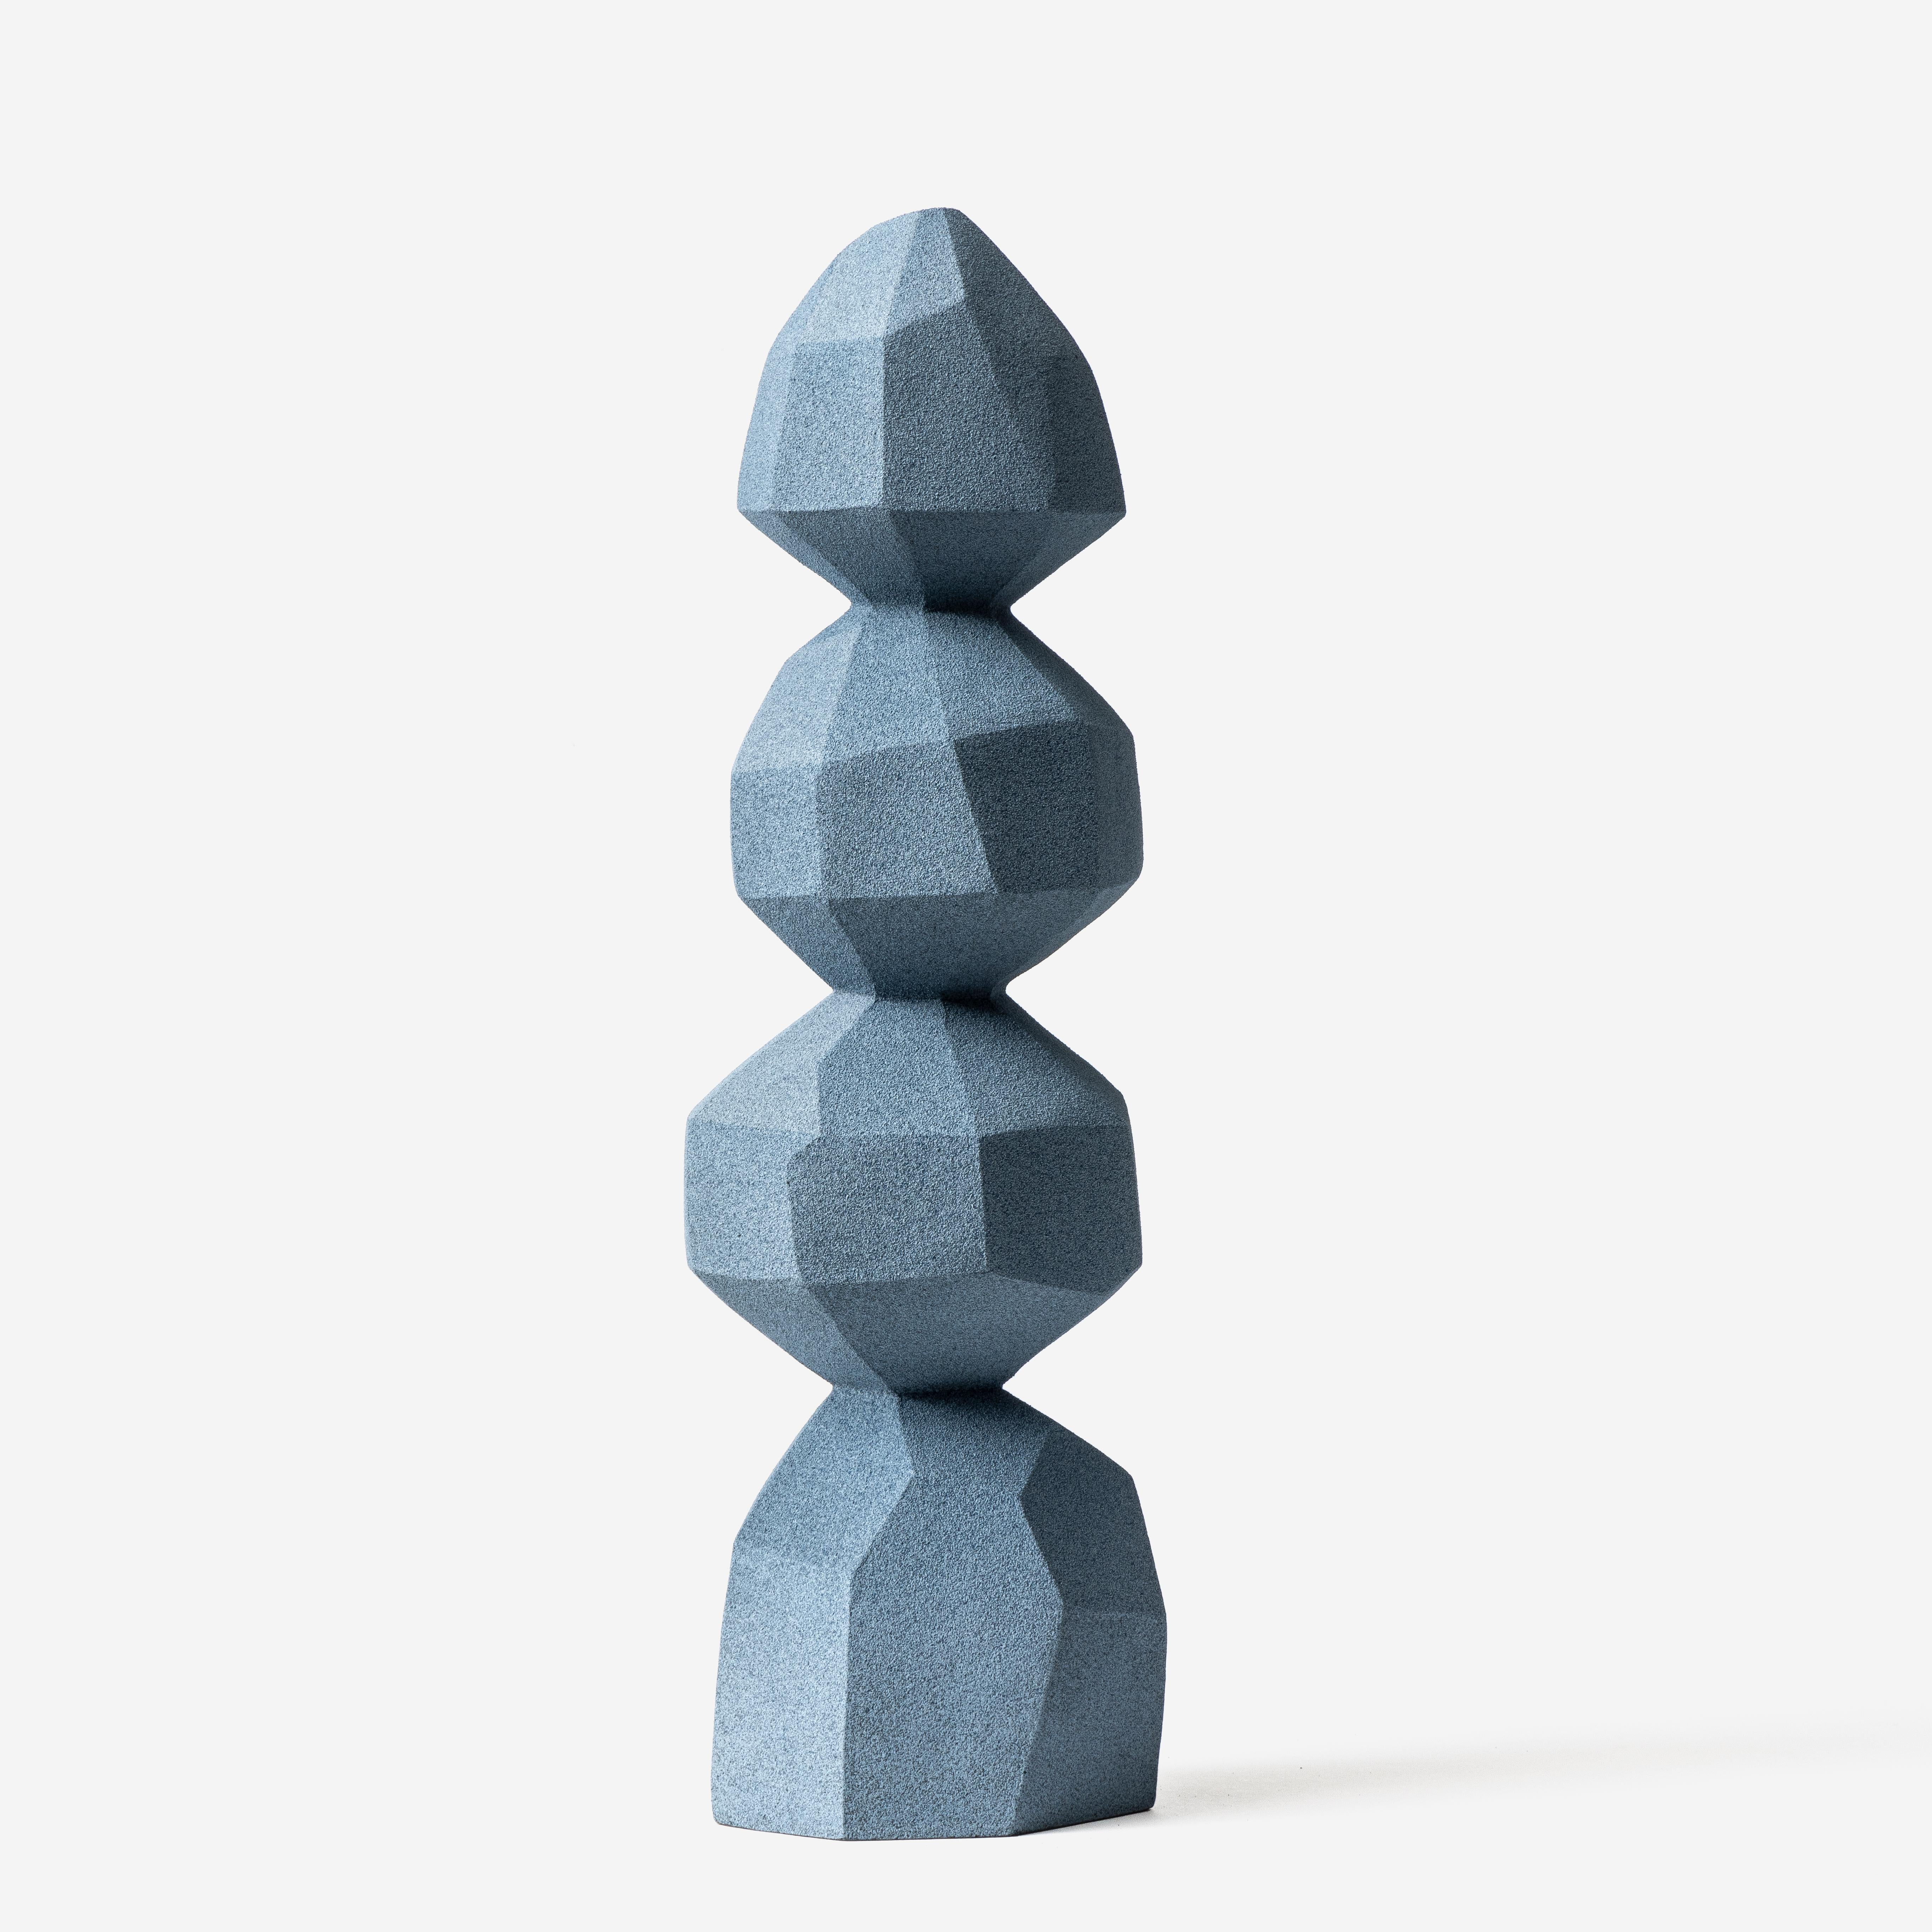 Blue Growth, 2023, (Ceramic, C. 16 in. h x 4.7 in. w x 4.4 in. d, Object No.: 4153)

Turi Heisselberg Pedersen consistently strives to manifest the vessel as a testament to abstract form and as a standalone sculptural object. In her interplay